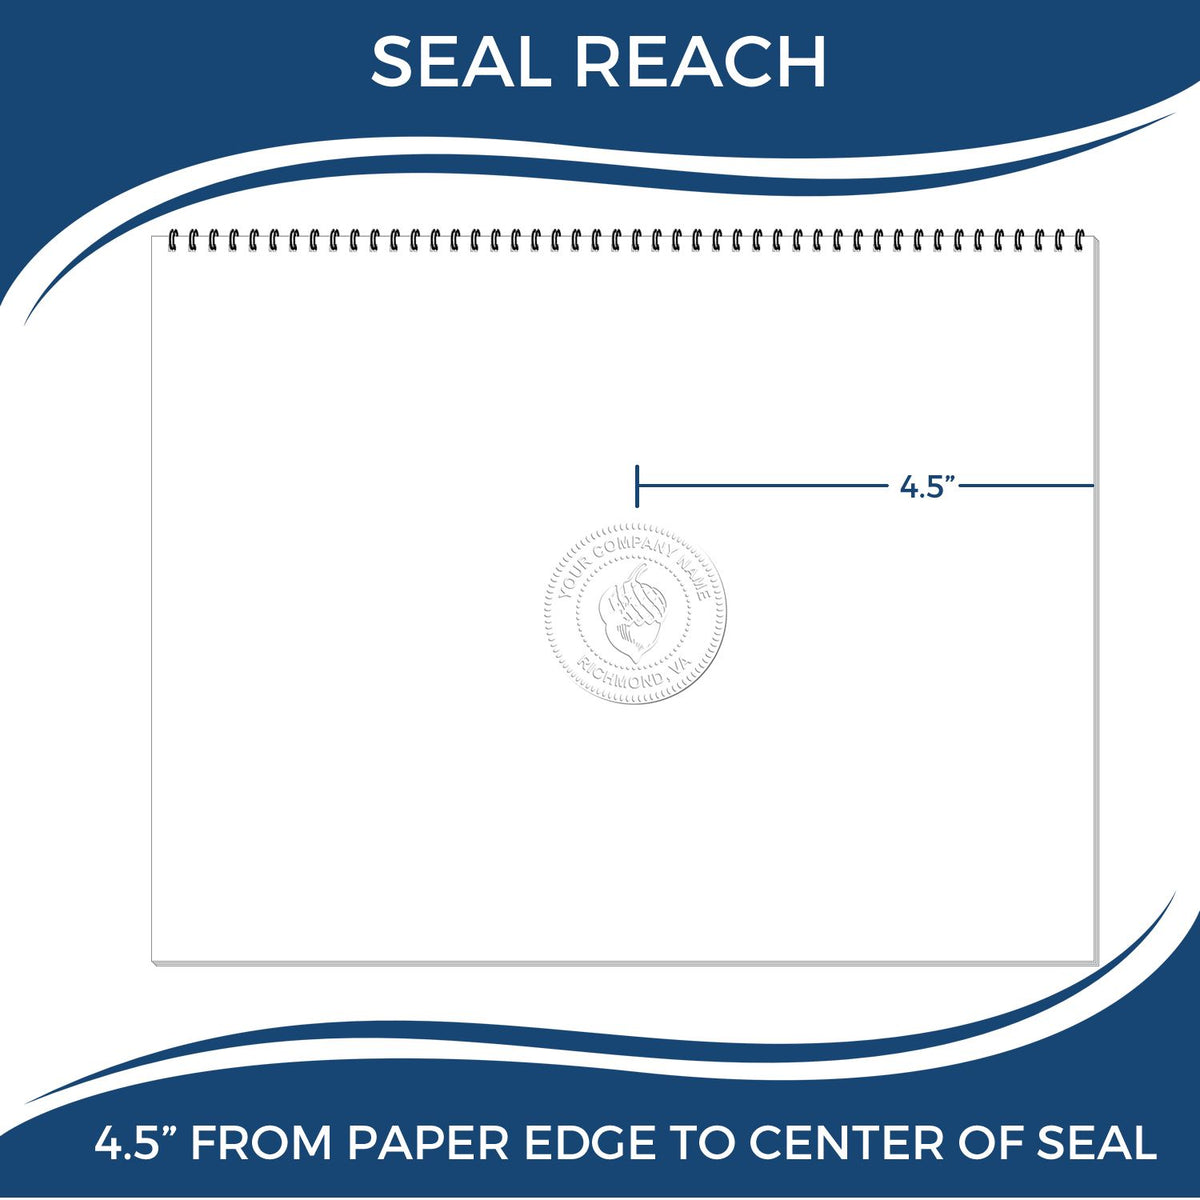 An infographic showing the seal reach which is represented by a ruler and a miniature seal image of the State of Virginia Extended Long Reach Geologist Seal